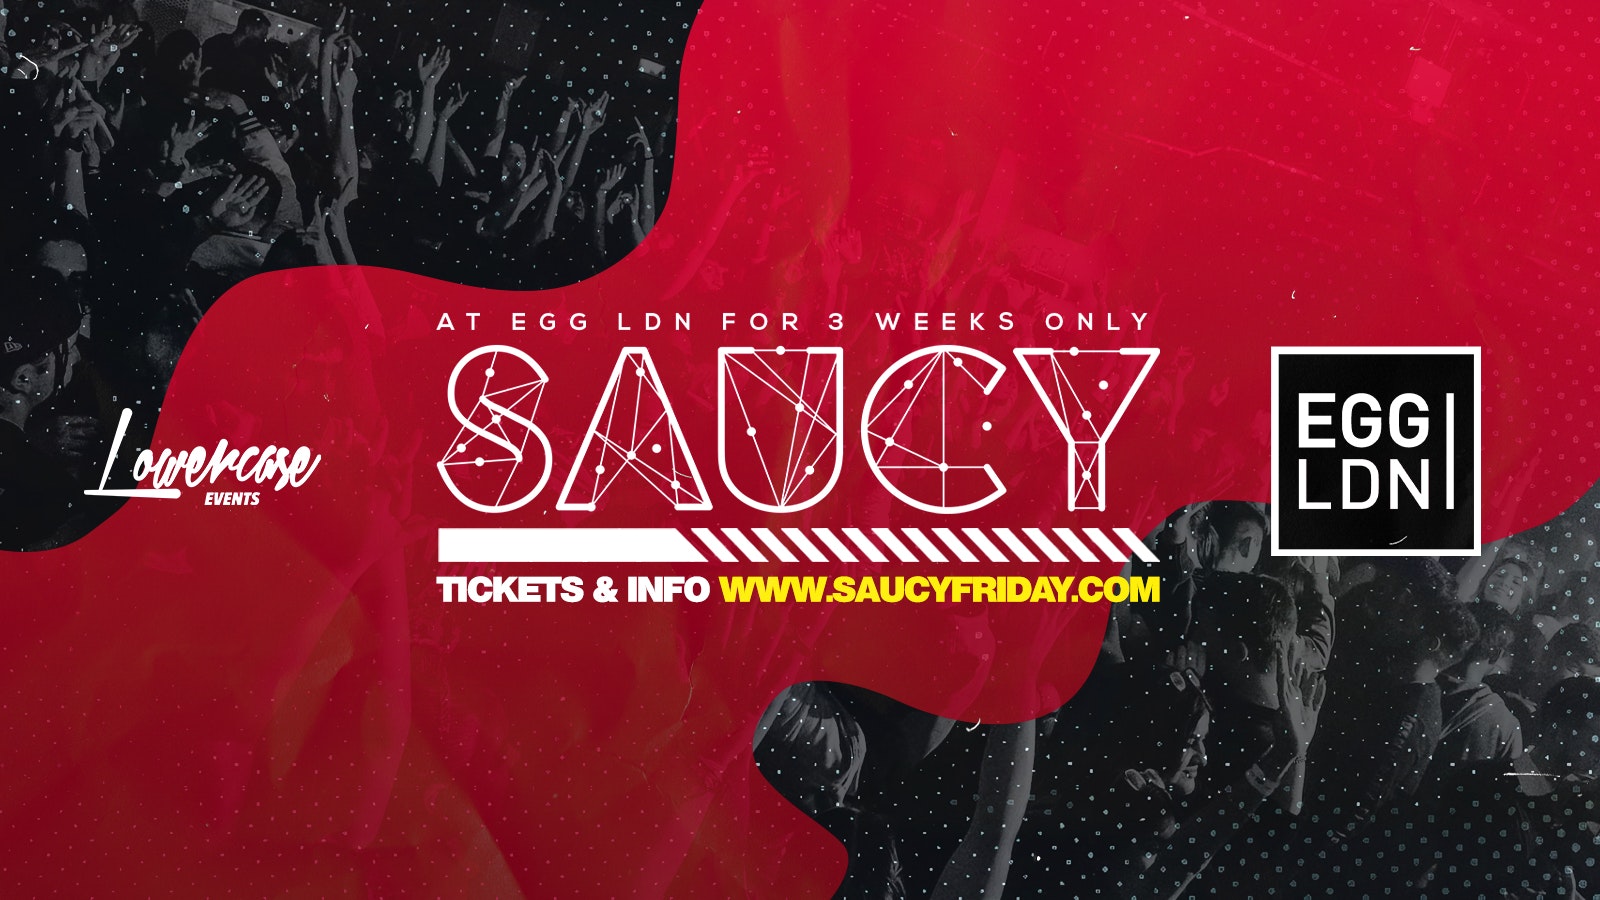 Saucy Fridays 🎉 – London’s Biggest Weekly Student Friday At Egg London ft DJ AR